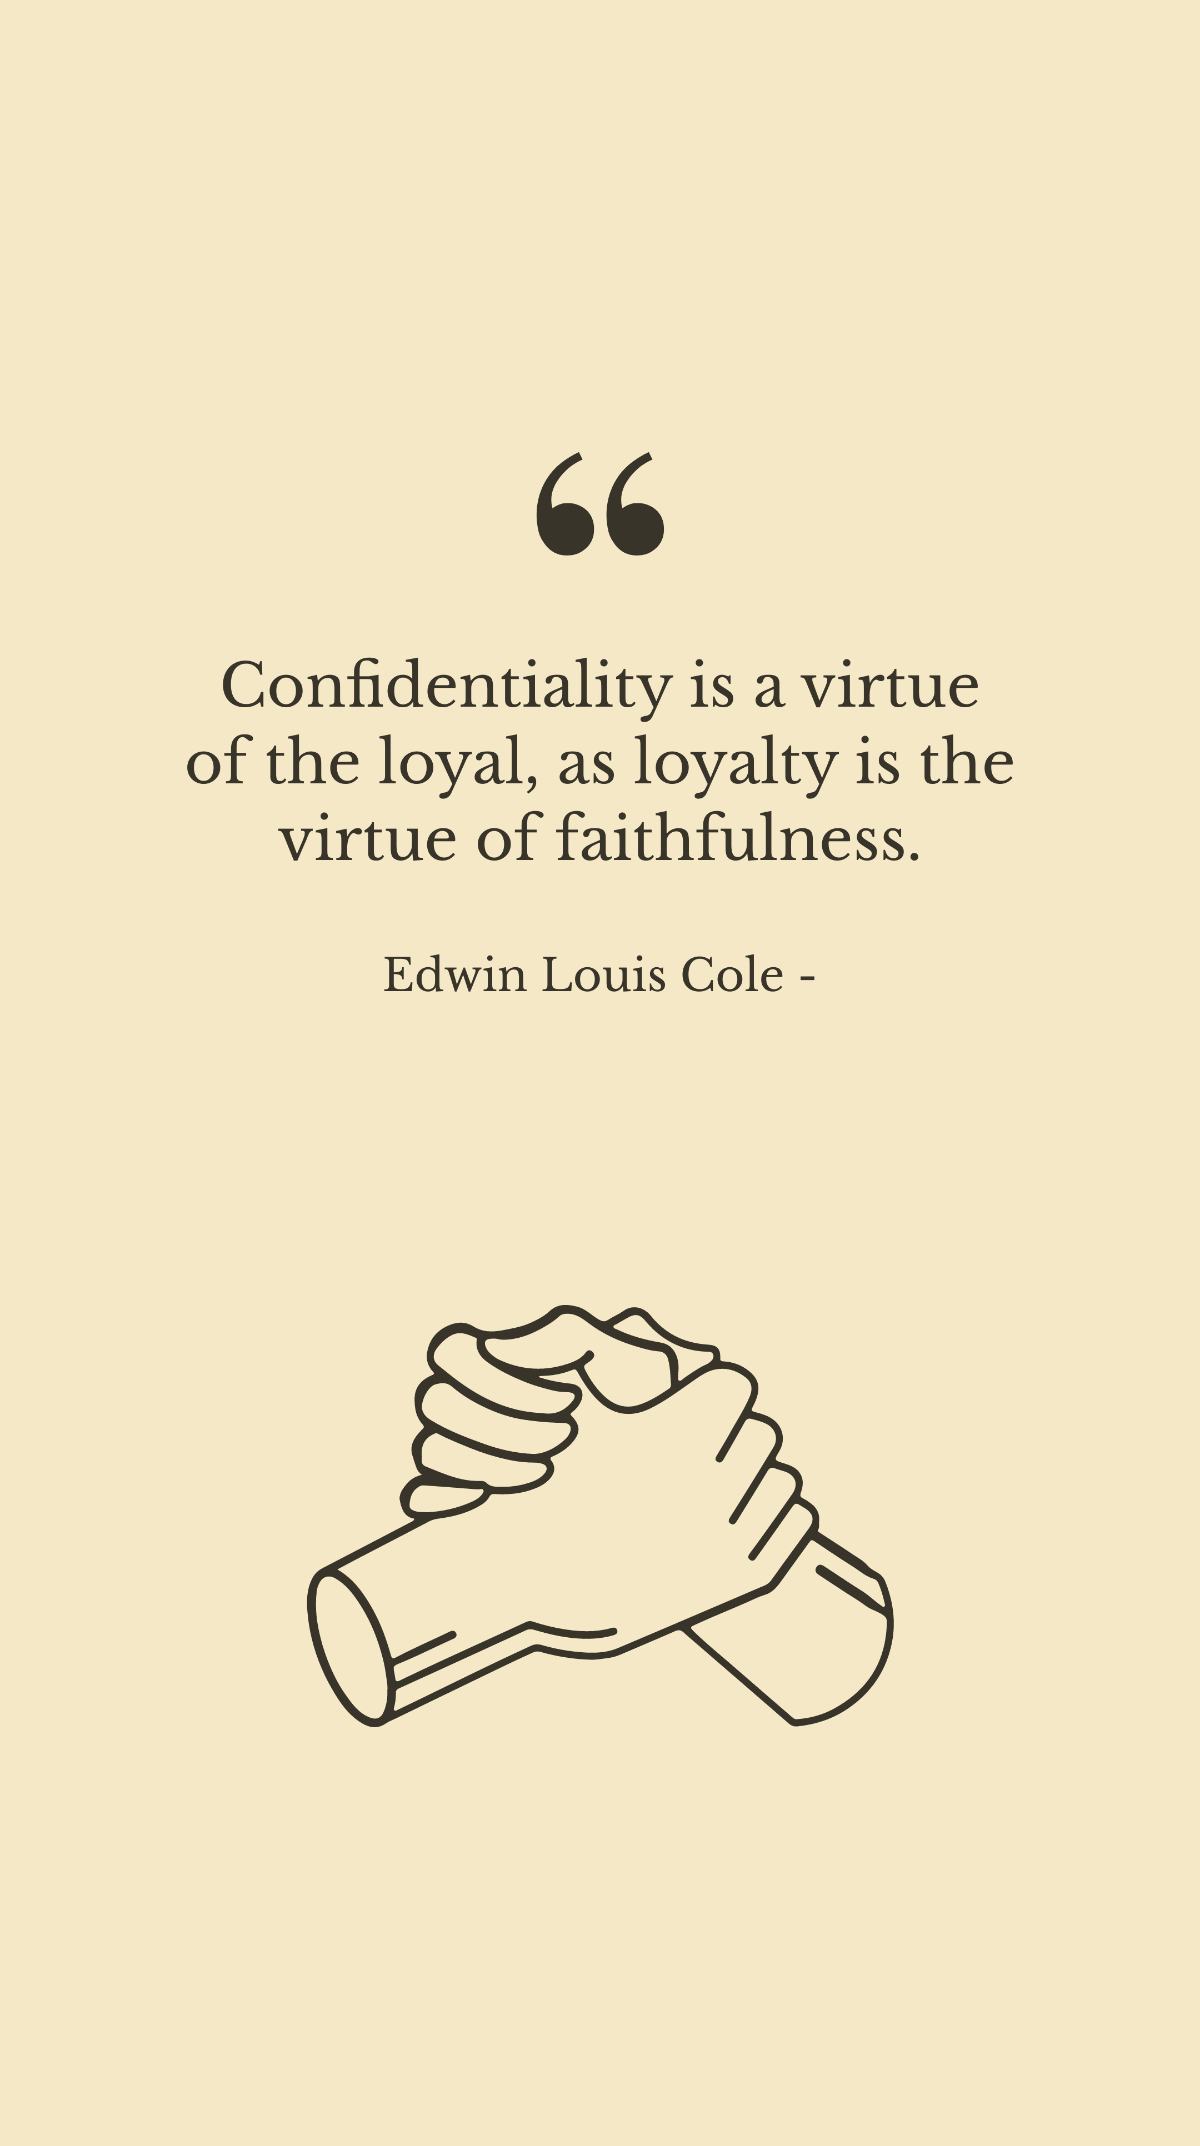 Edwin Louis Cole - Confidentiality is a virtue of the loyal, as loyalty is the virtue of faithfulness. Template